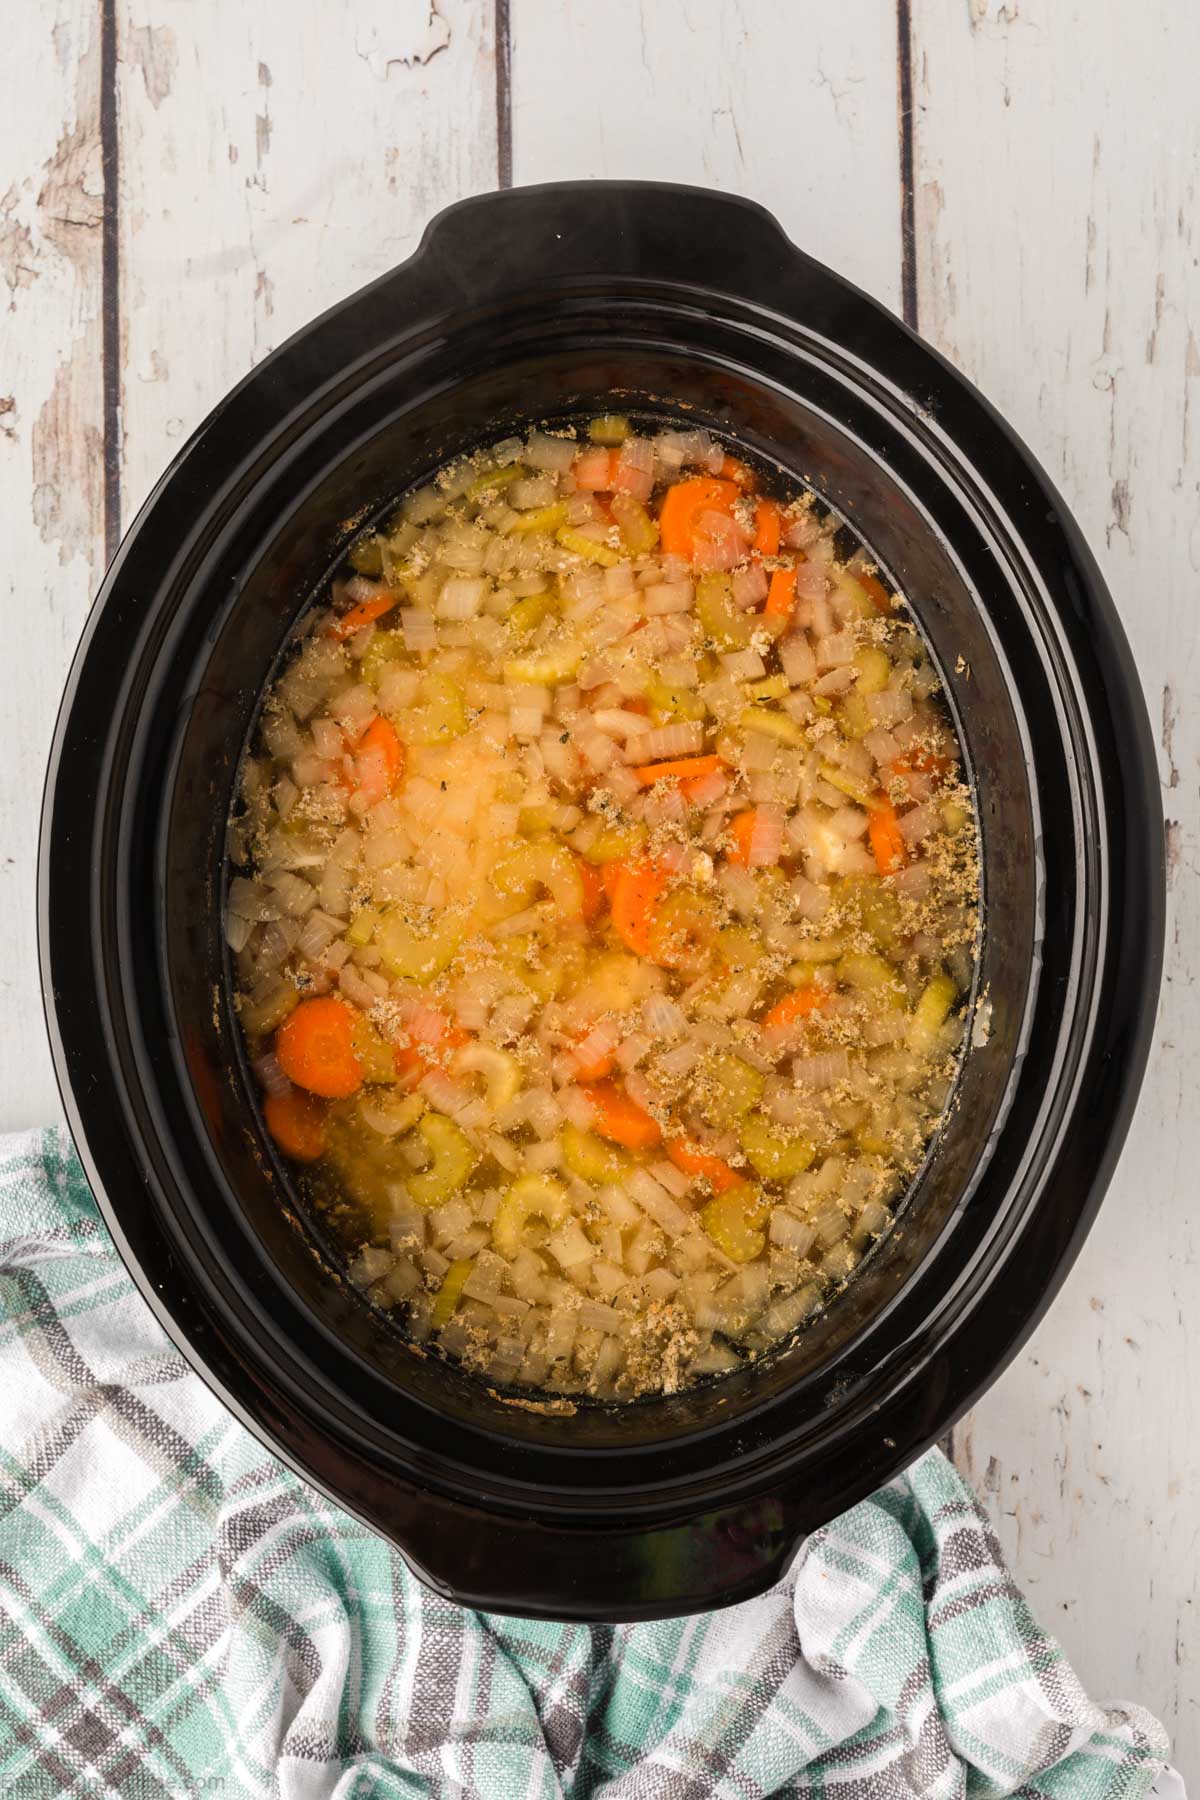 Cooking chicken stew in the slow cooker